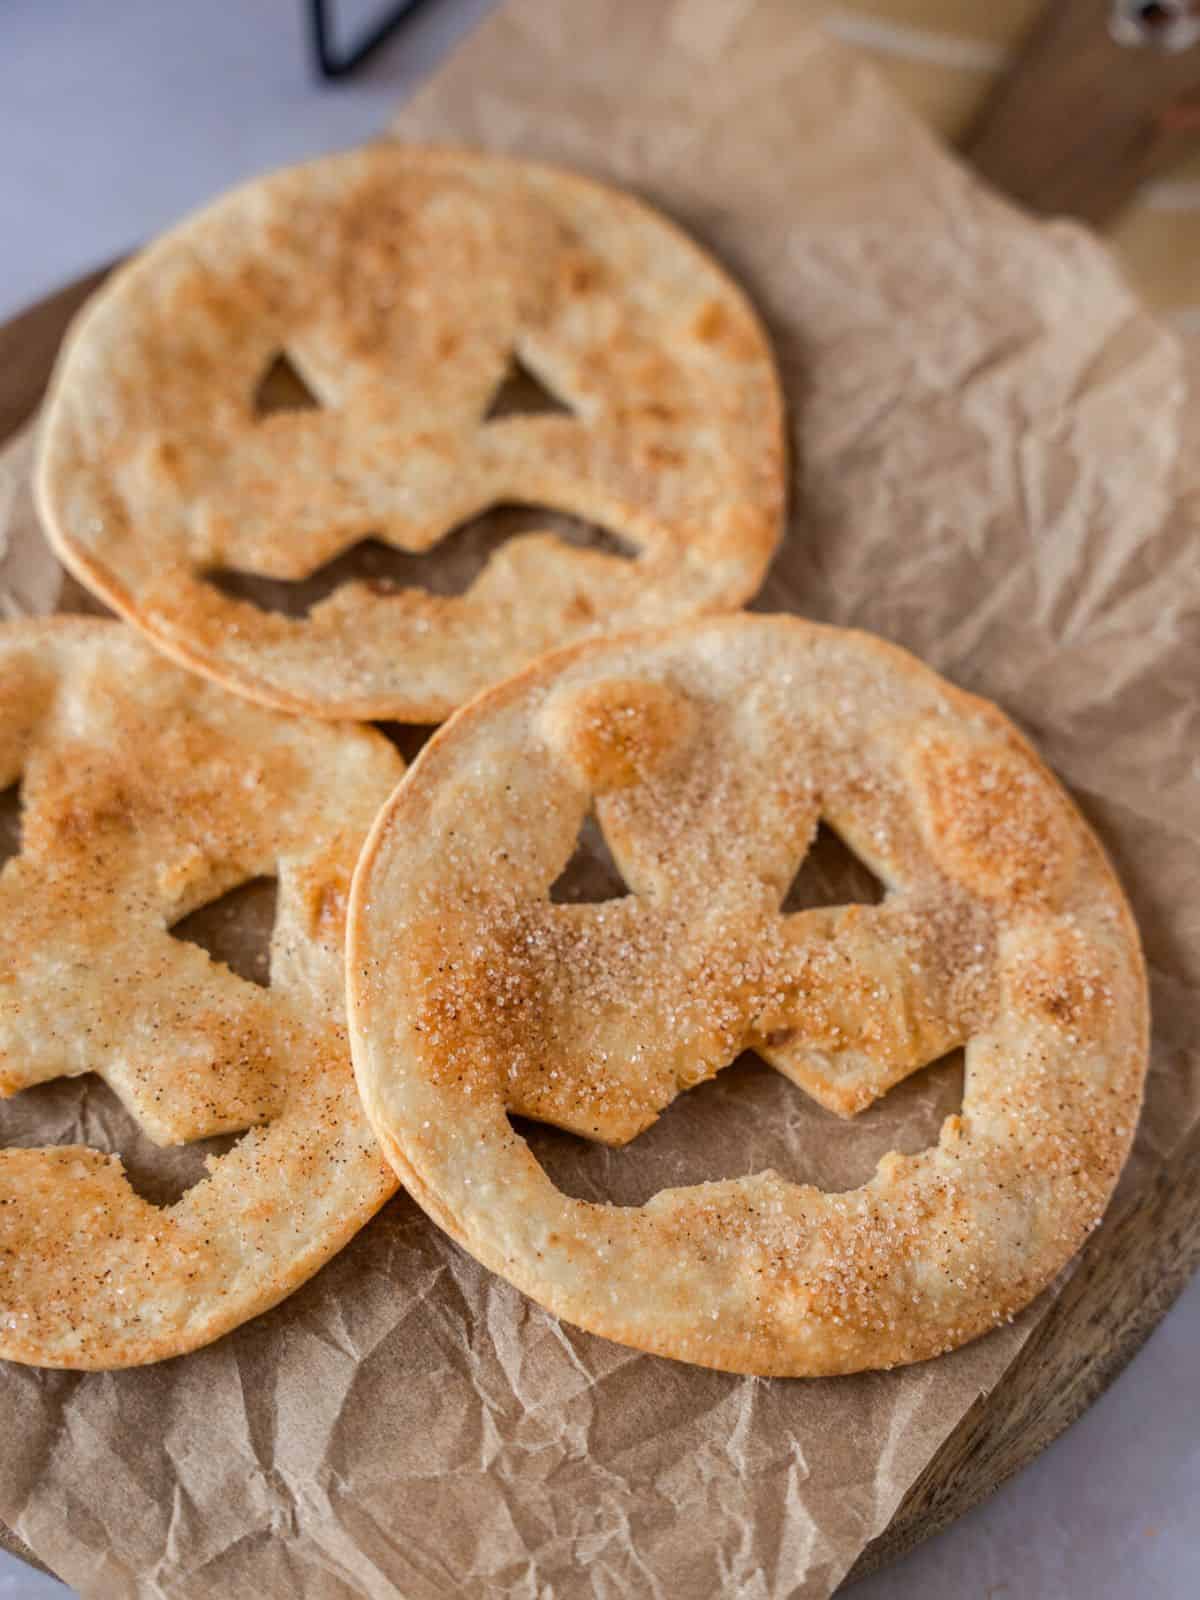 Flour tortillas cut like jack o lanterns and dusted with cinnamon and sugar.